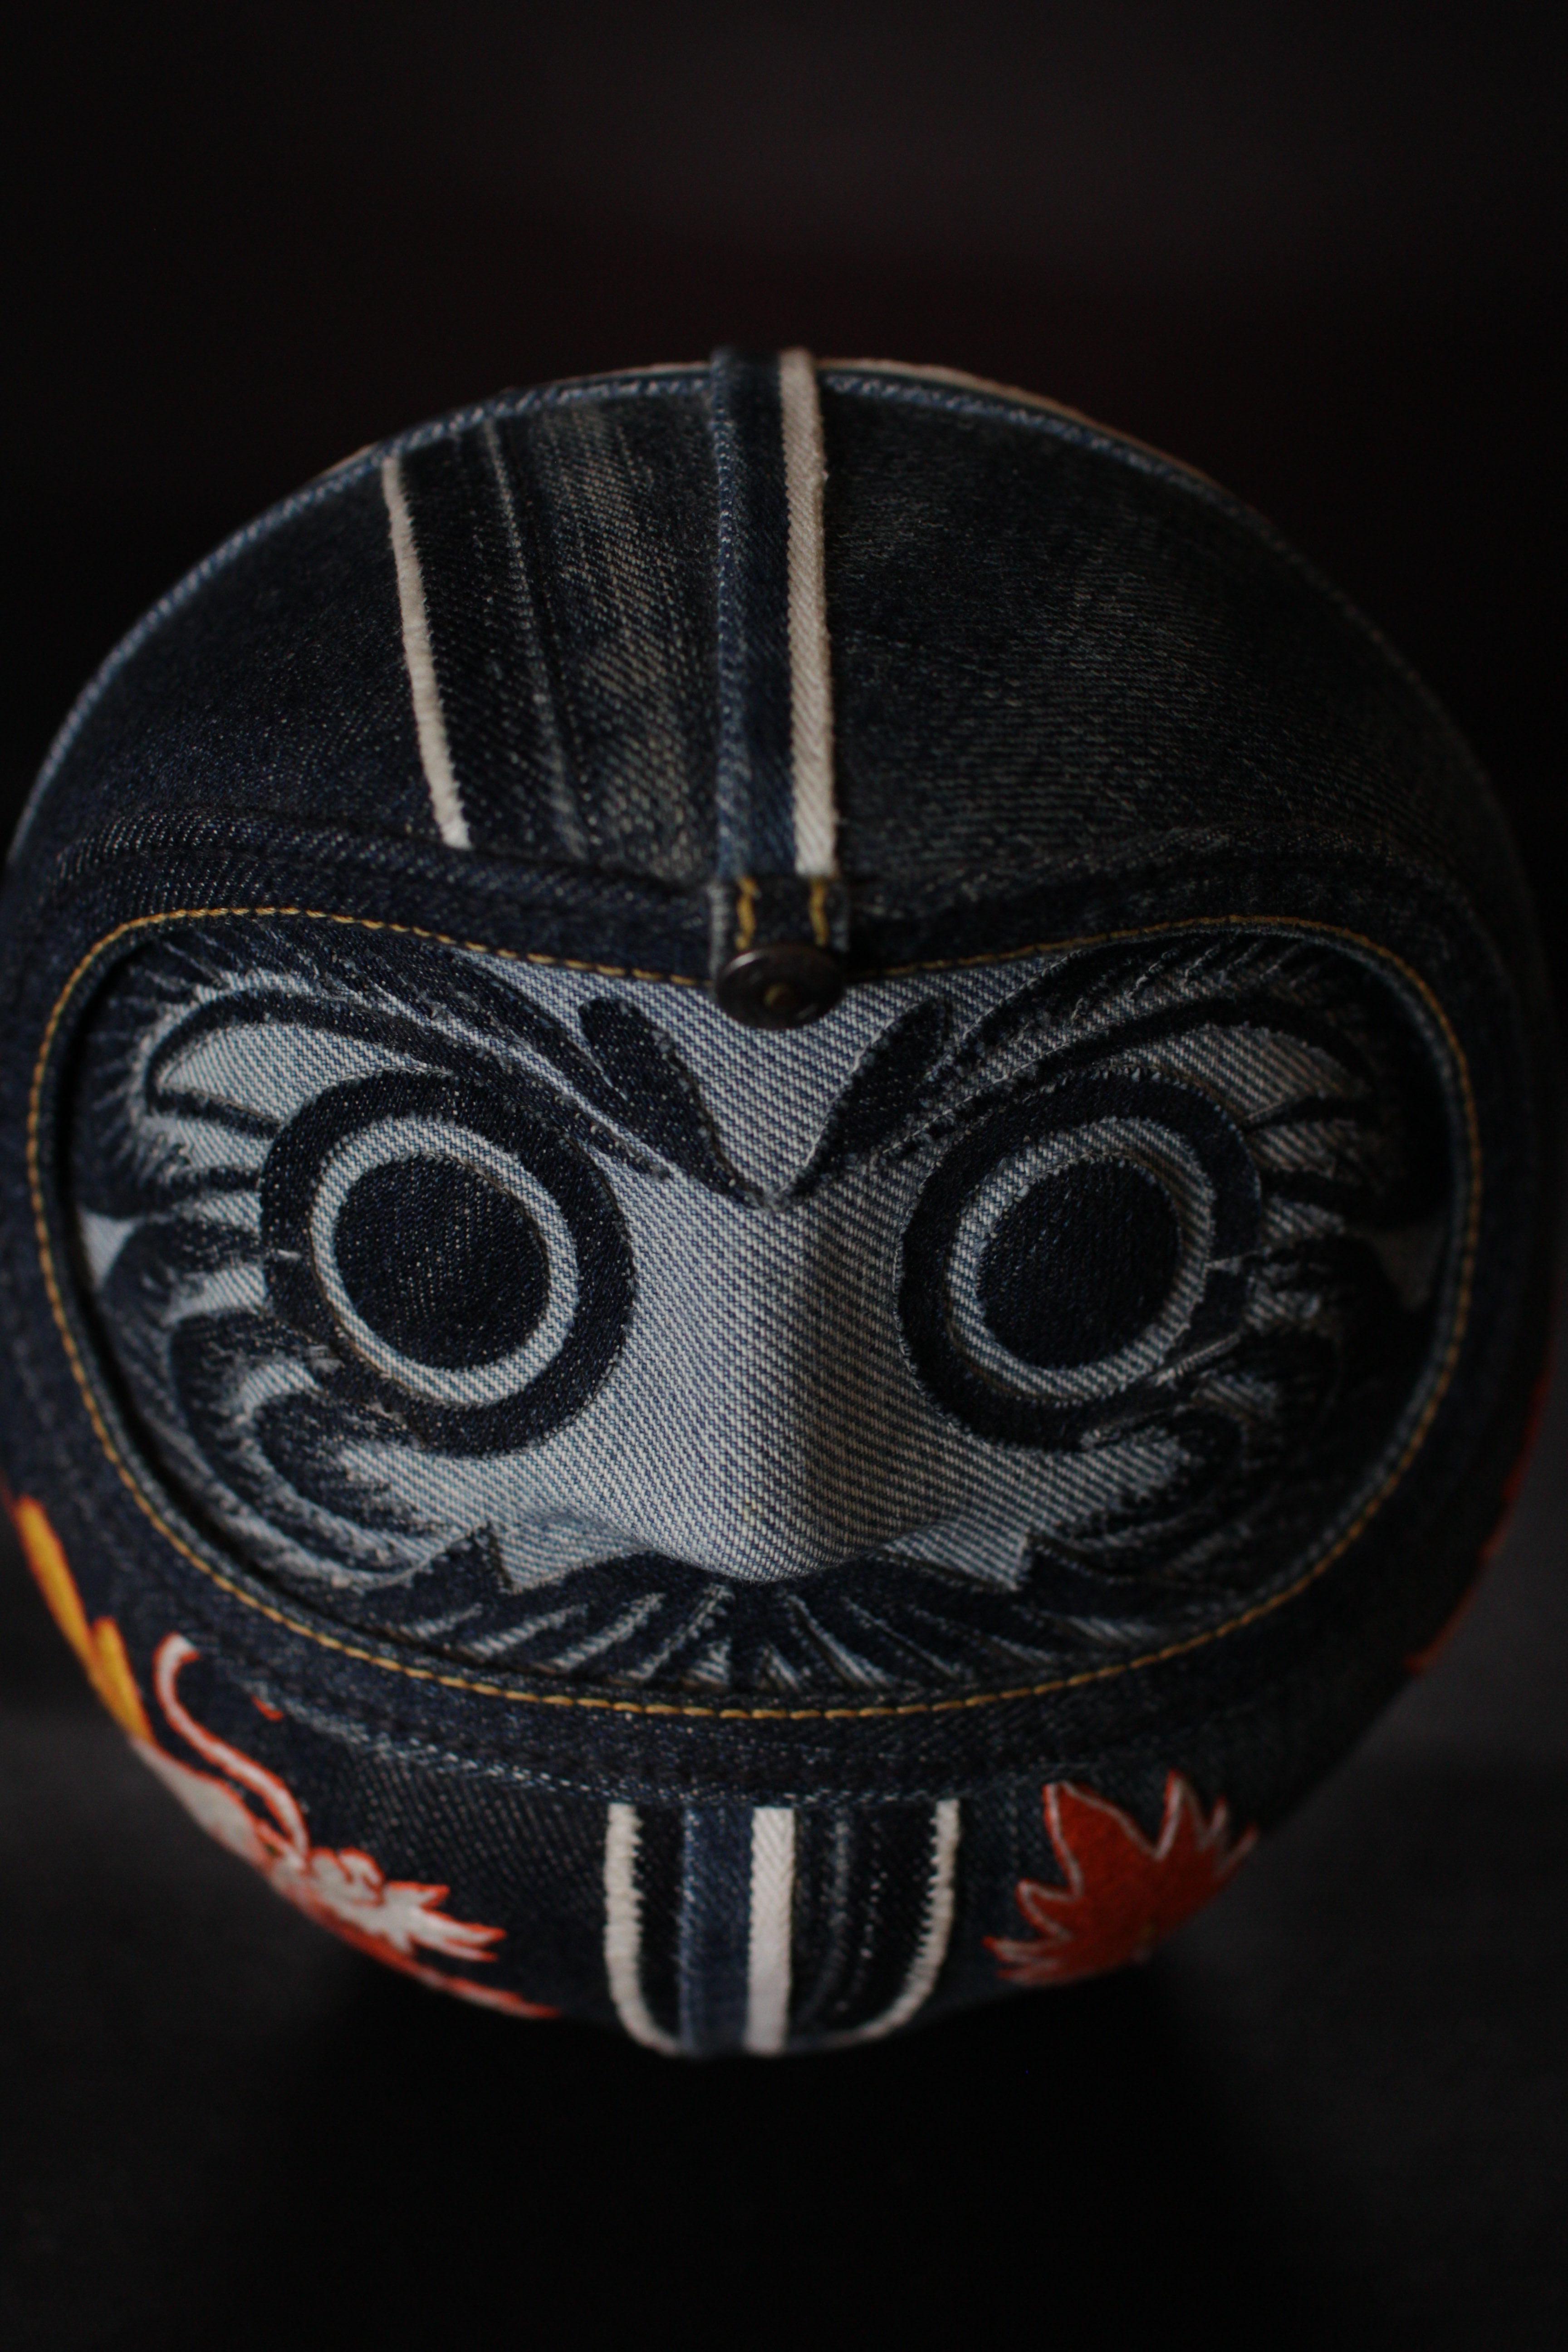 

Daruma is a traditional Japanese figurine that means to get up again and again even after falling down.
It has been loved as a decoration to ward off evil or to express wishes for about 400 years.

The meaning of the face beard is the crane for